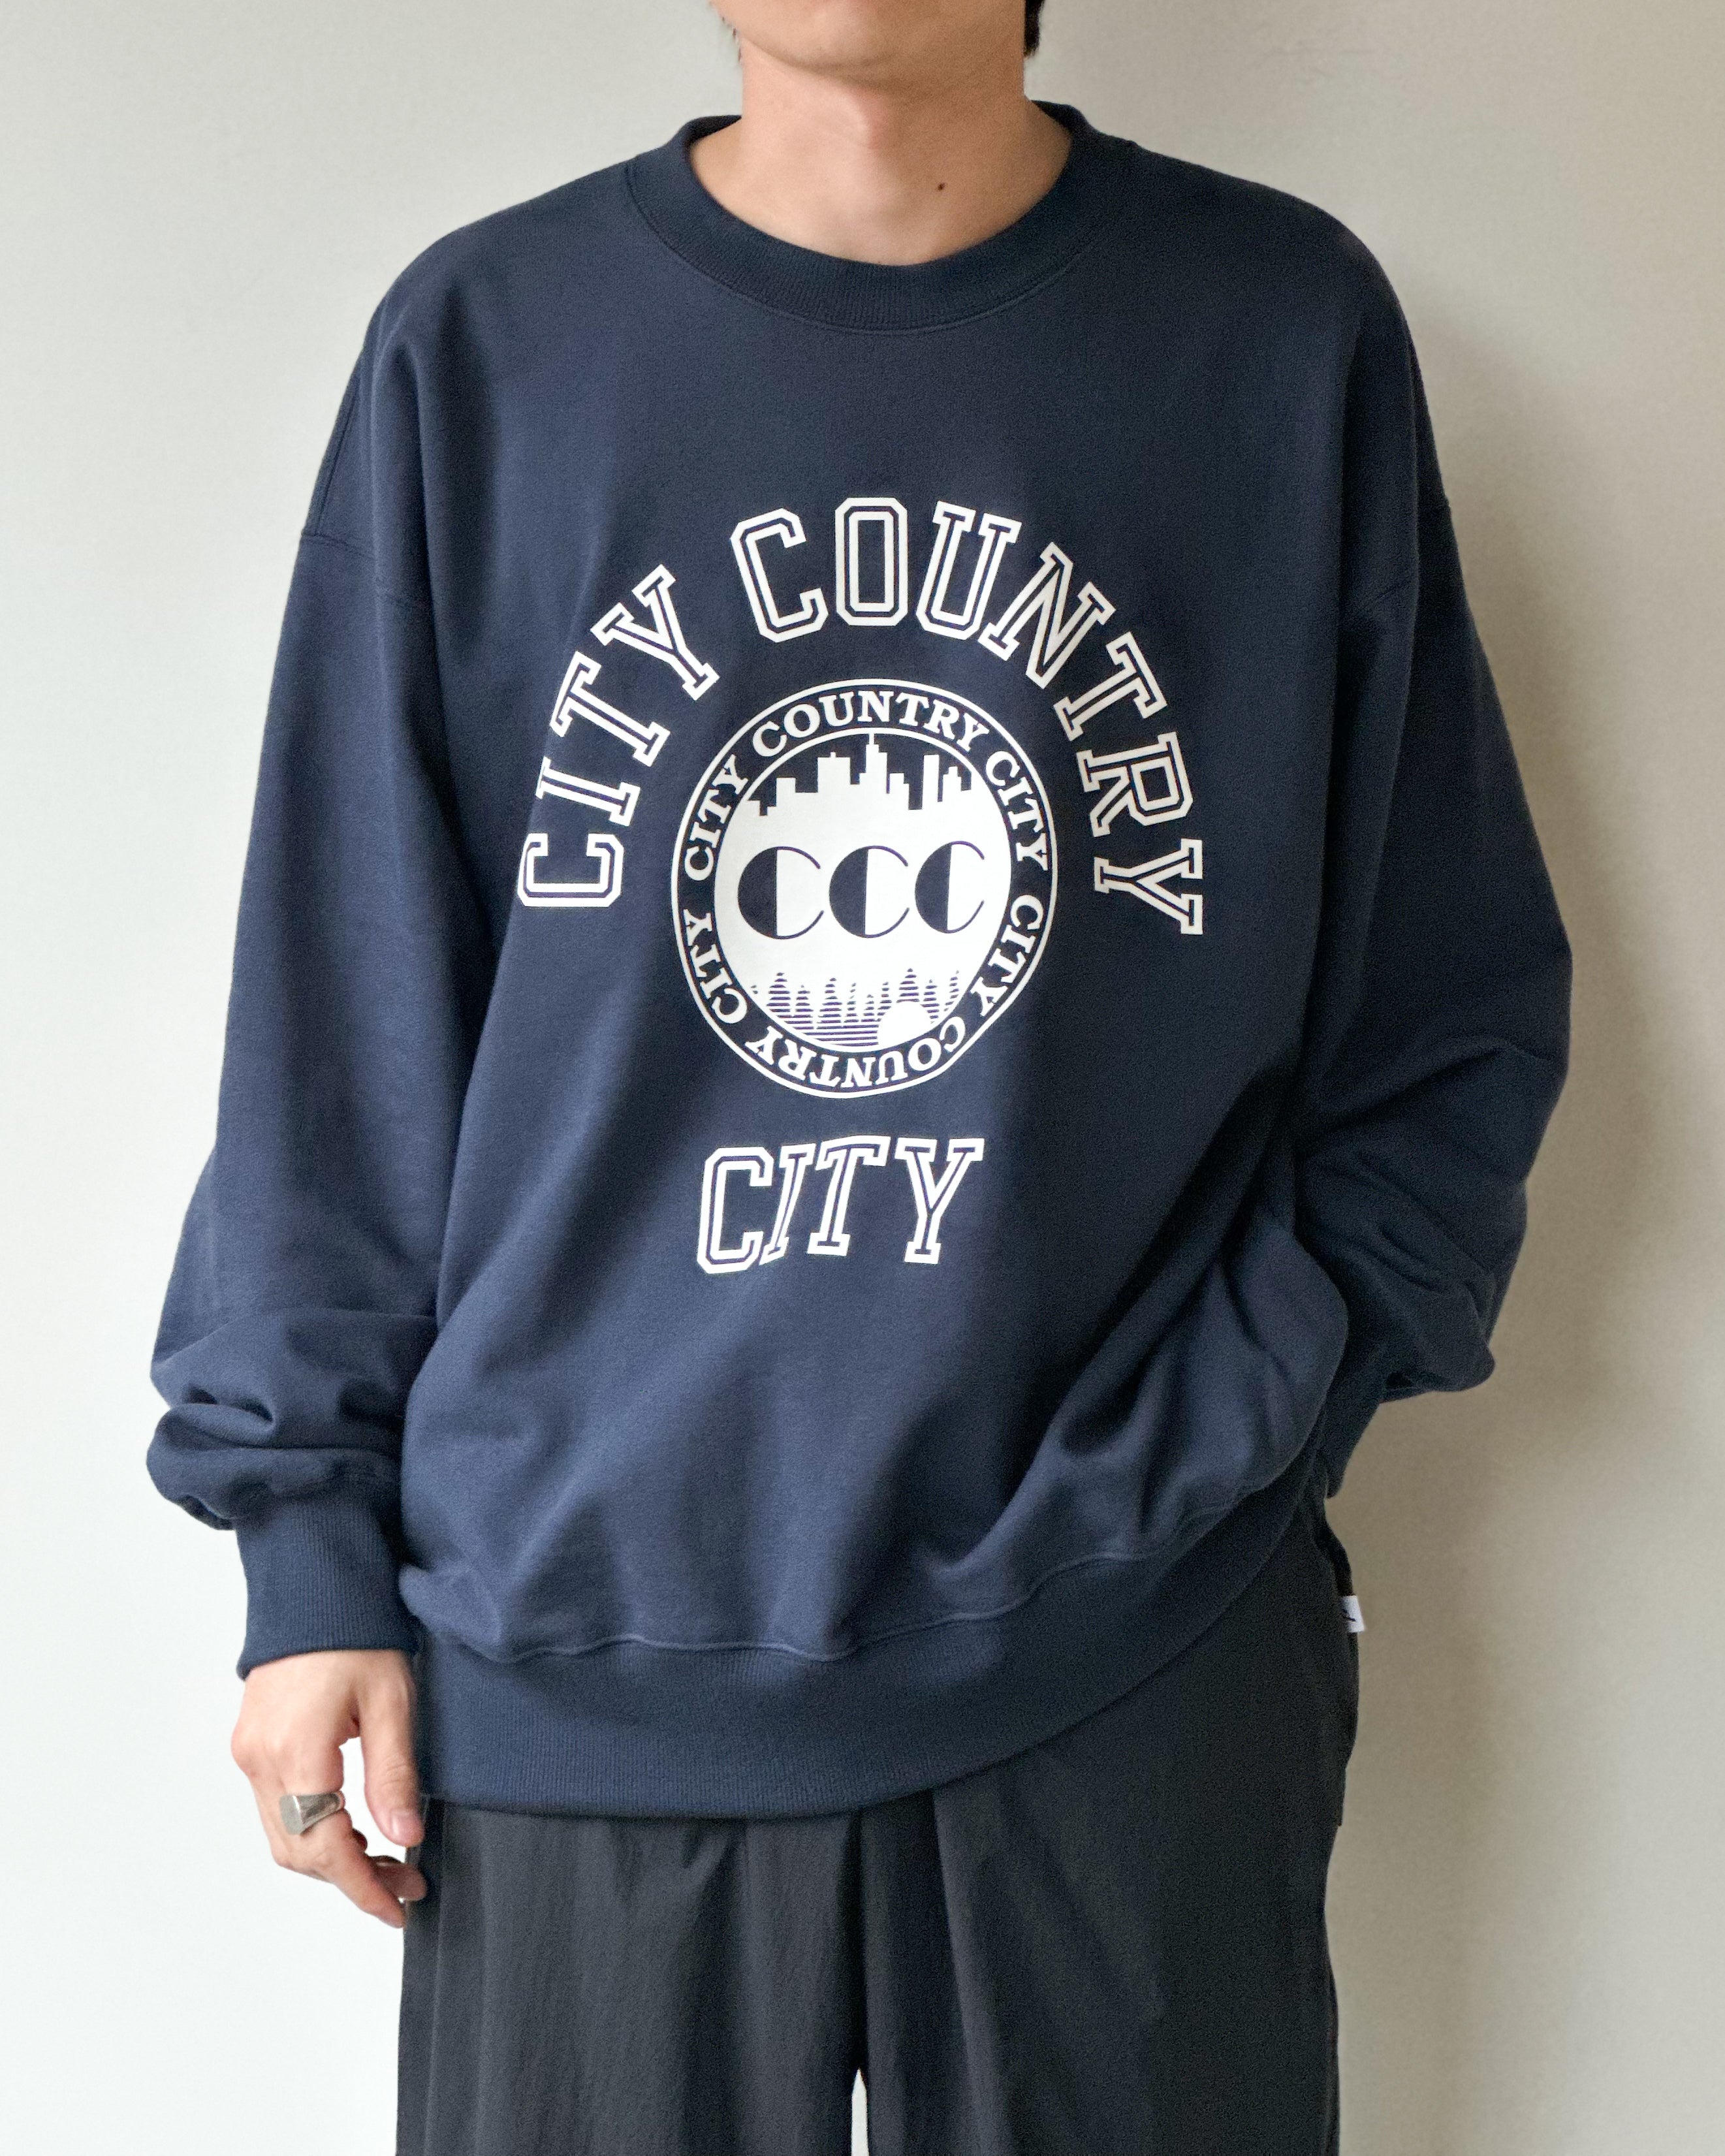 【CITY COUNTRY CITY】COTTON SWEAT SHIRT COLLEGE LOGO - NAVY